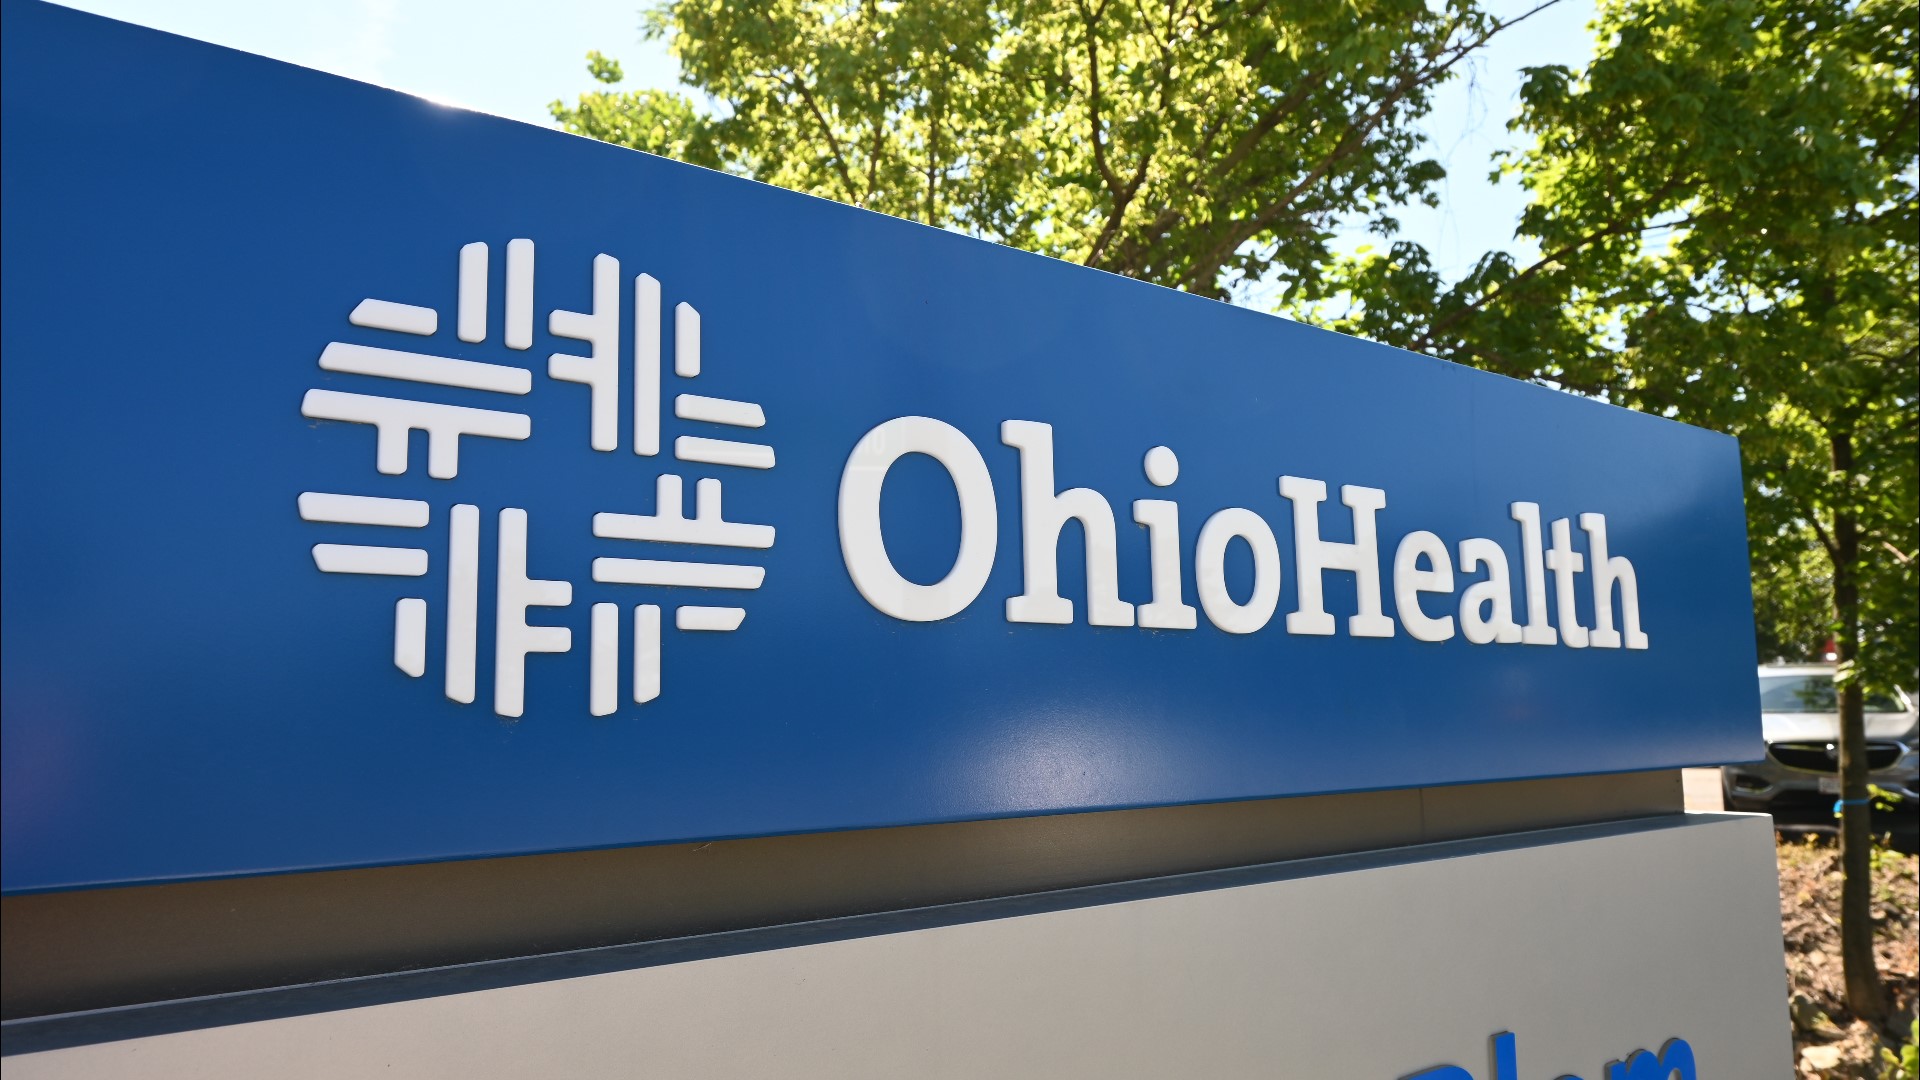 OhioHealth said in a release that they are not changing the mandate process, but pausing the timeline due to recent regulatory and legislative issues.